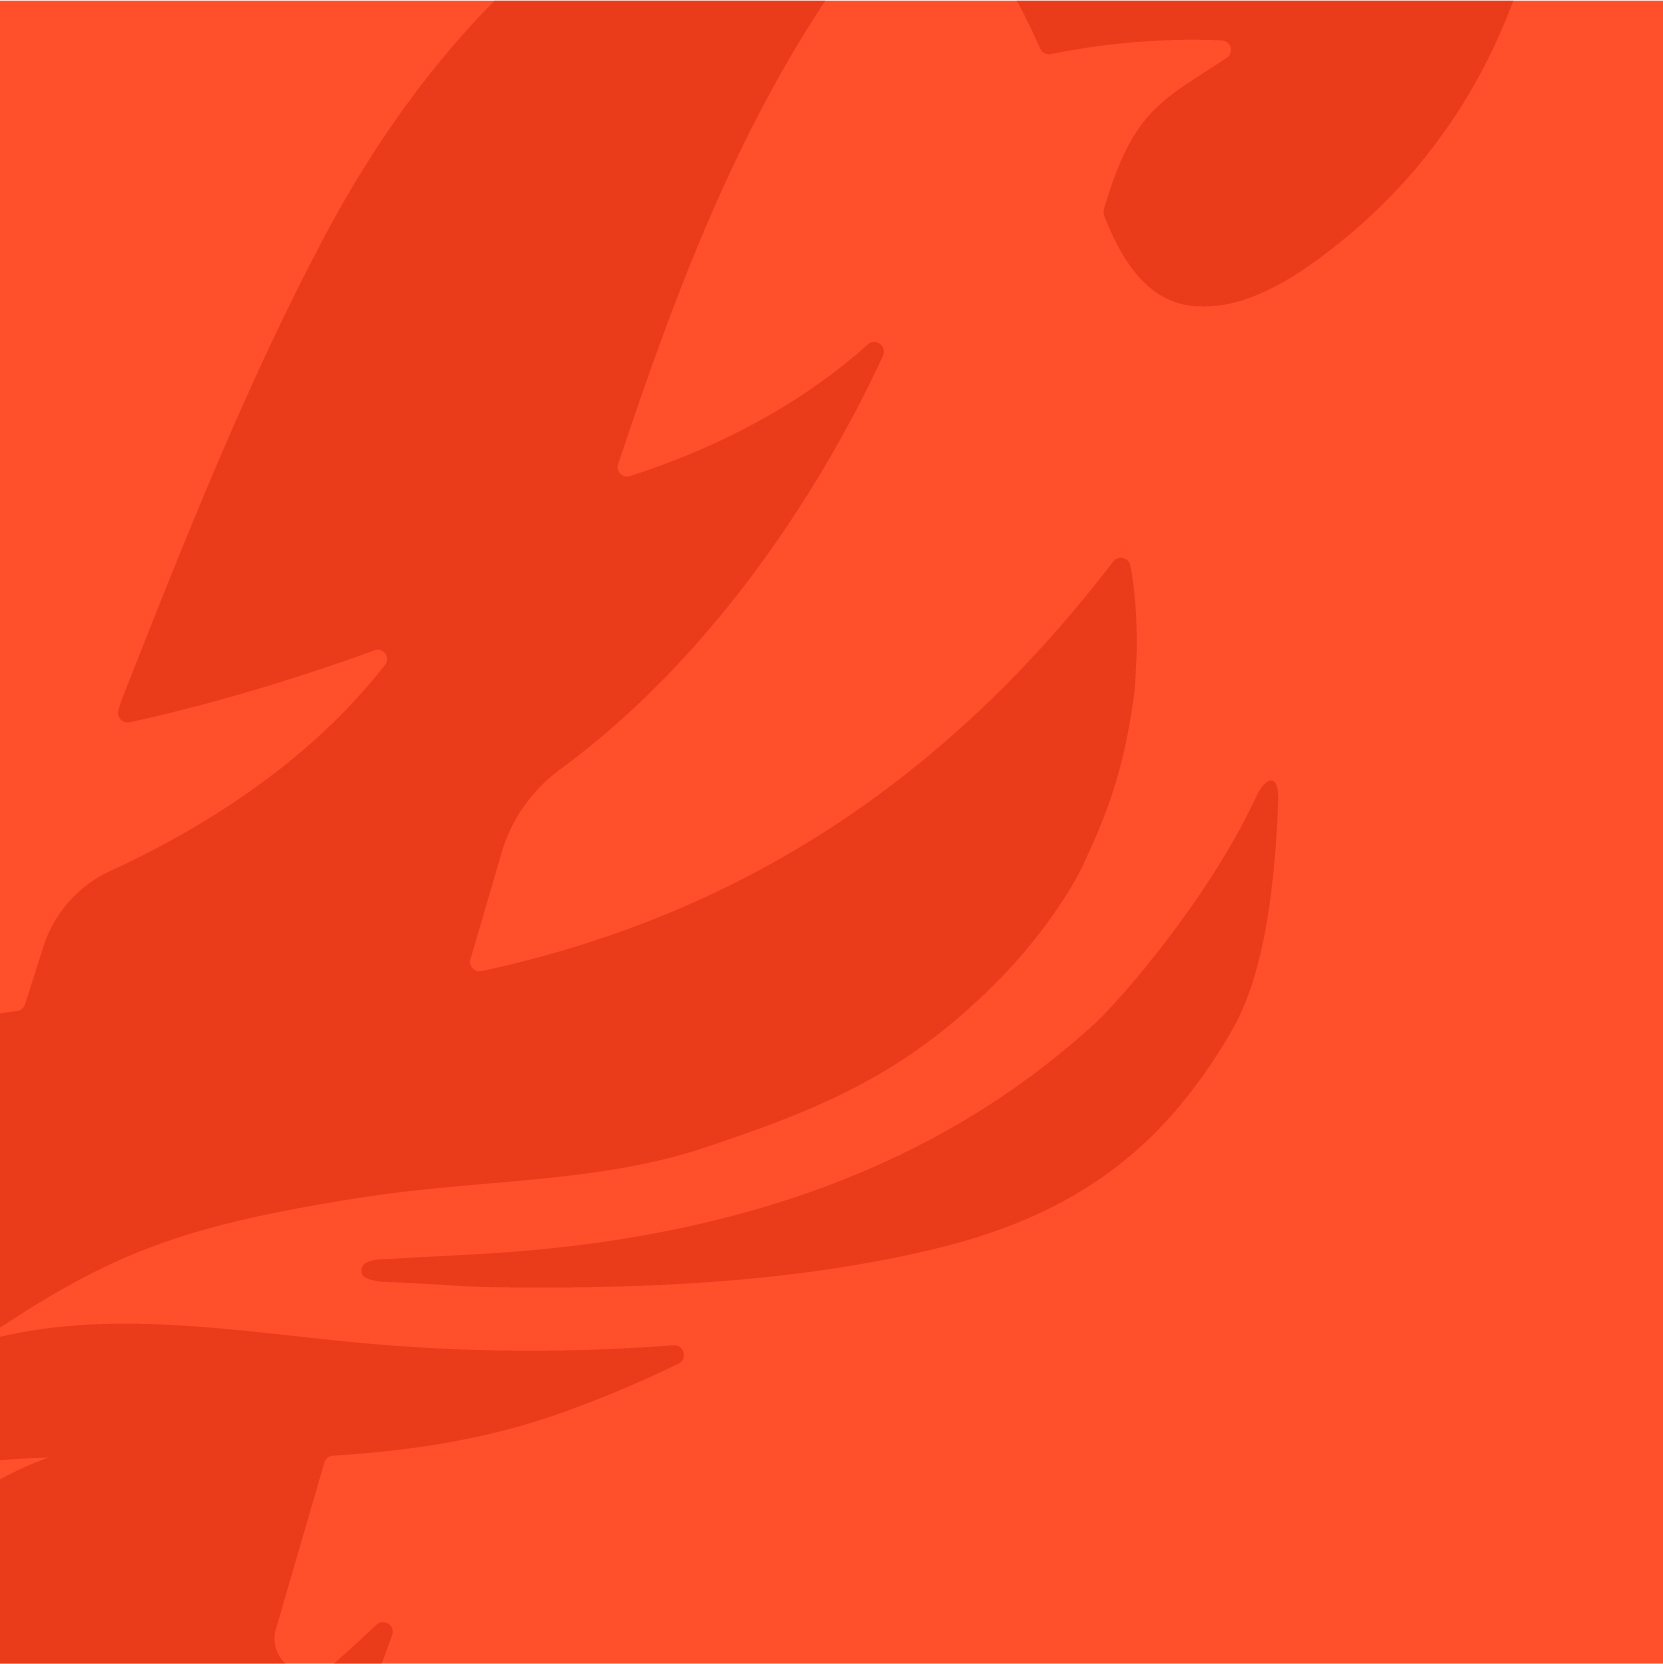 A placeholder image with a graphic of a flame on an orange background.